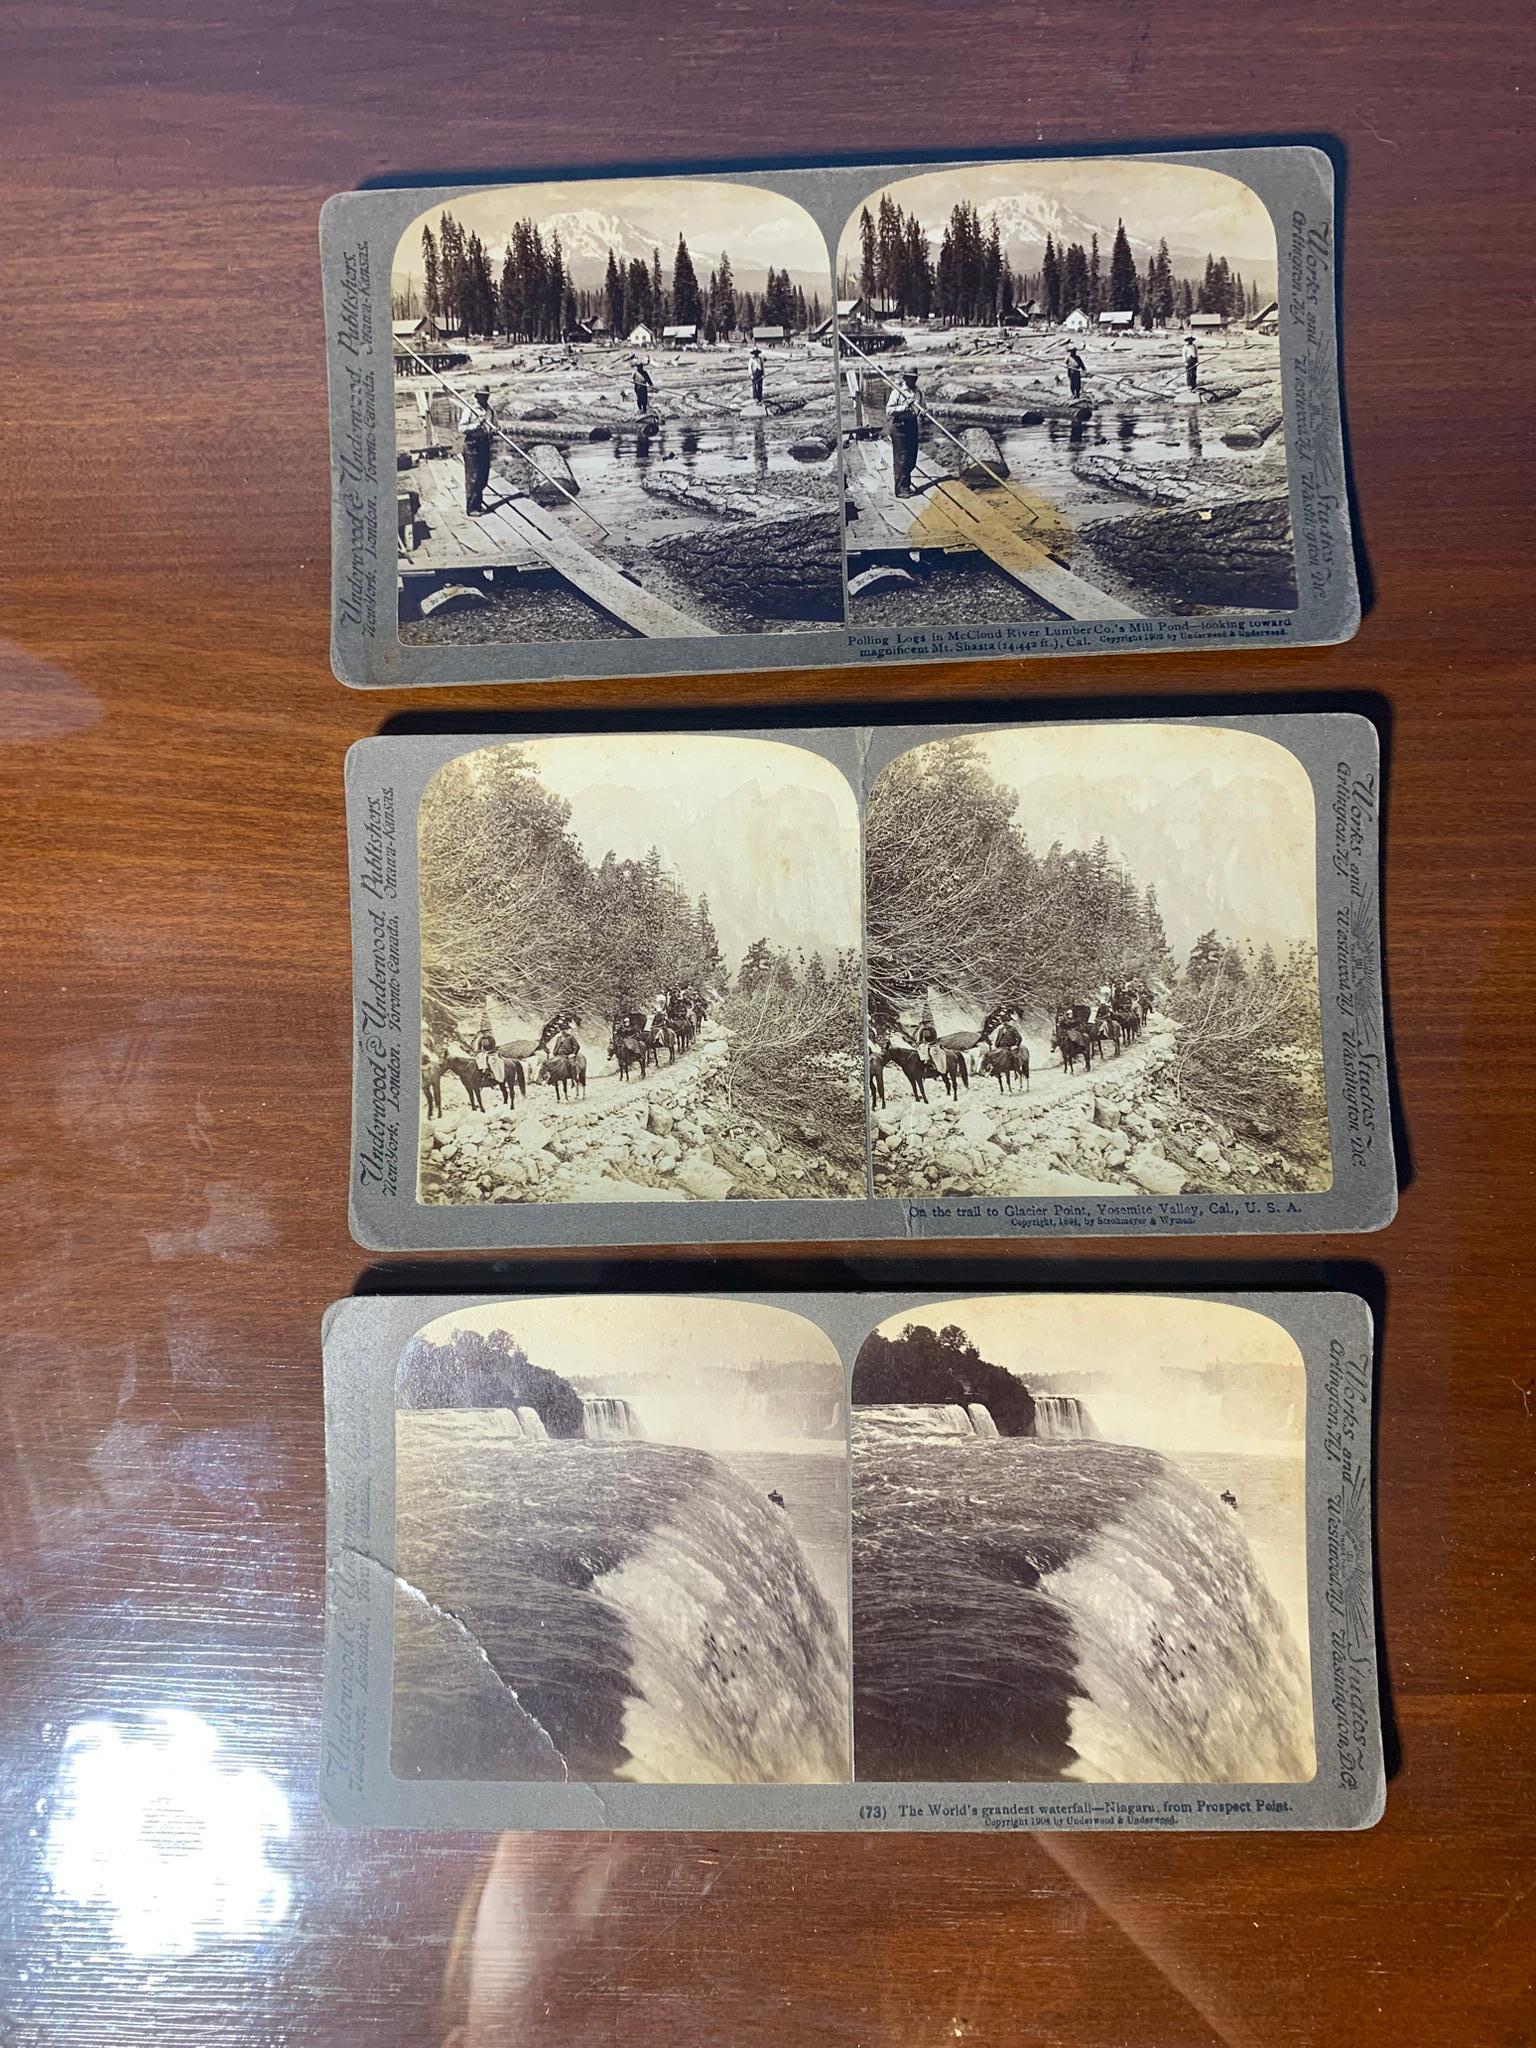 Stereoscope with Stereoview Photos